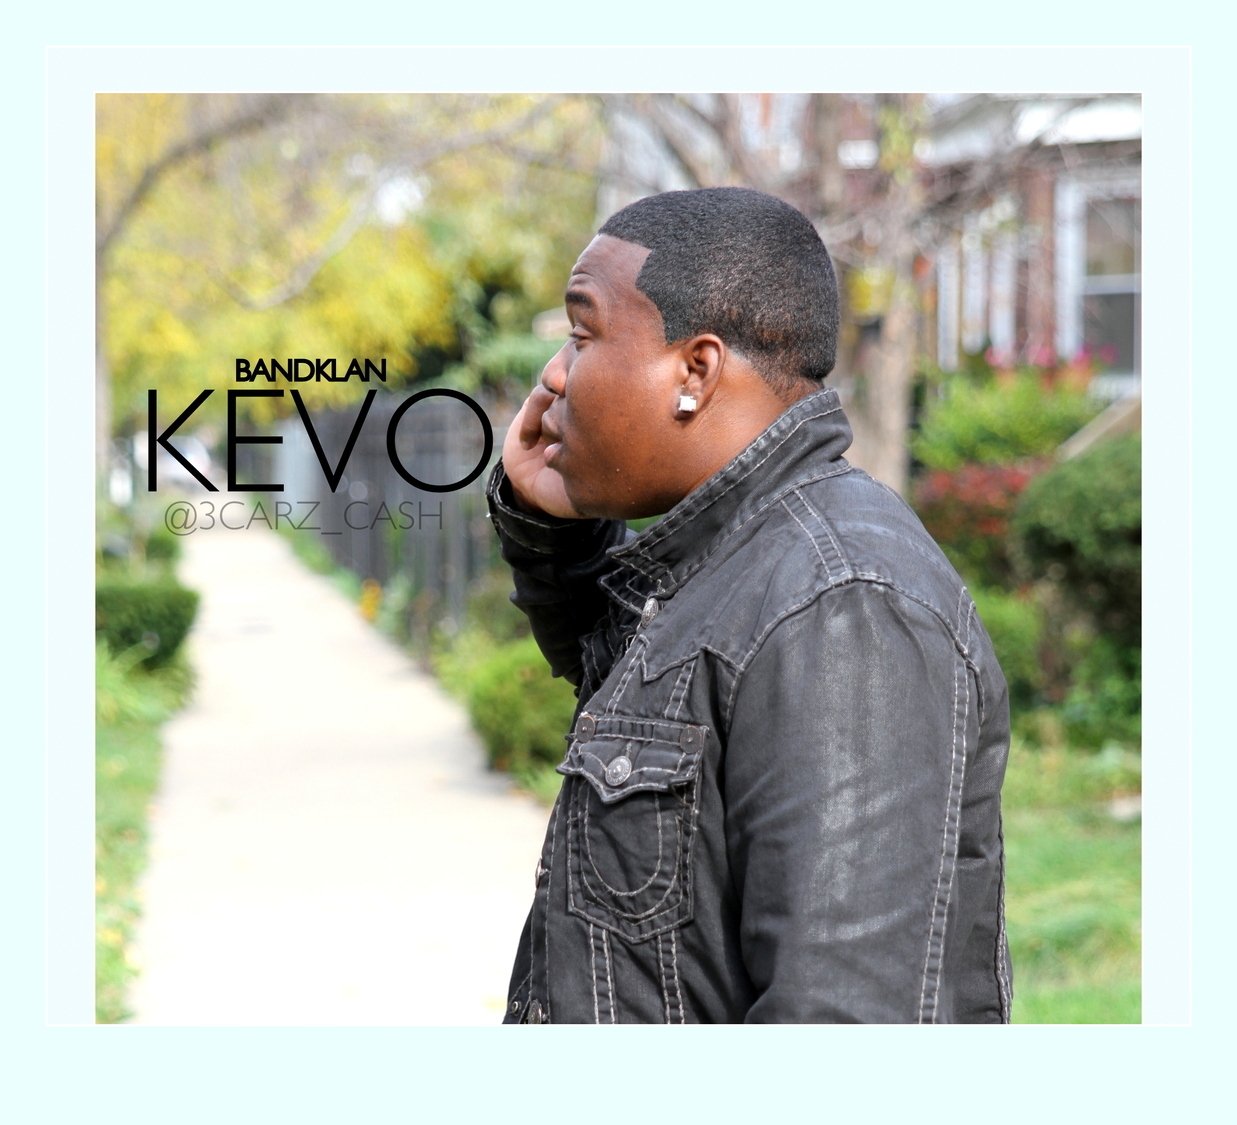 Man kevo band Who is